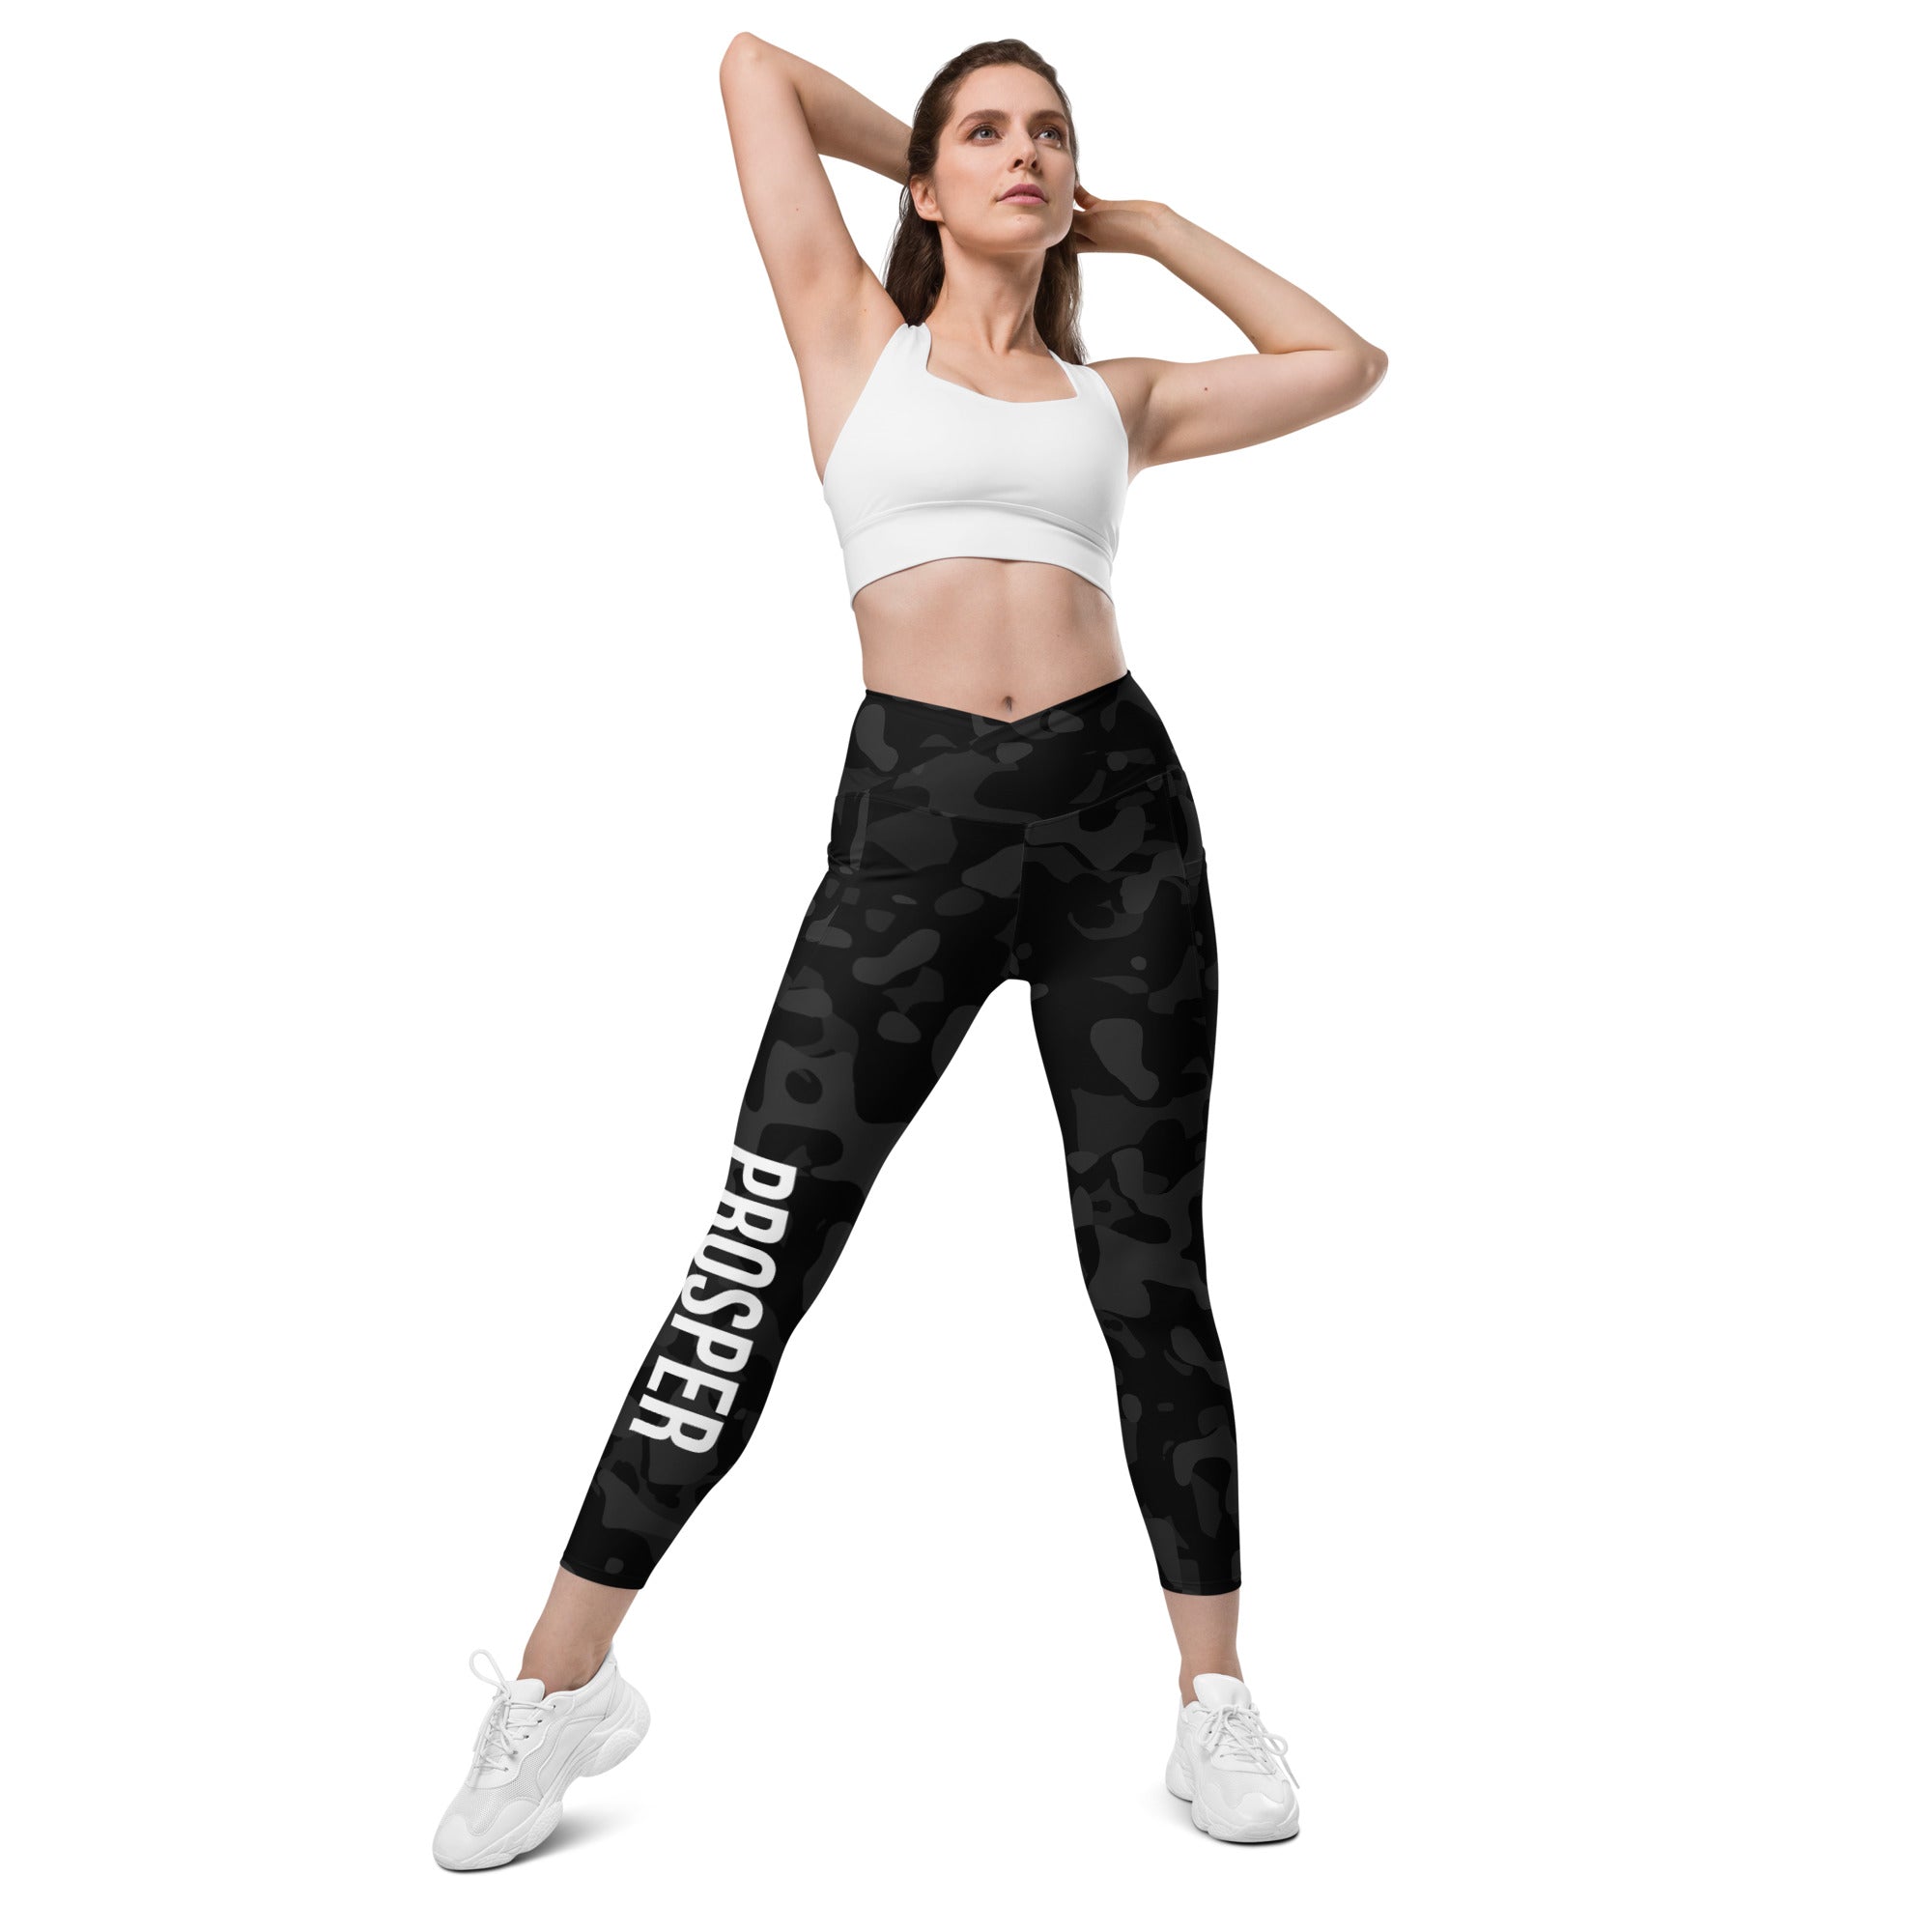 Prosper Ghost Camo Crossover Leggings with Pockets